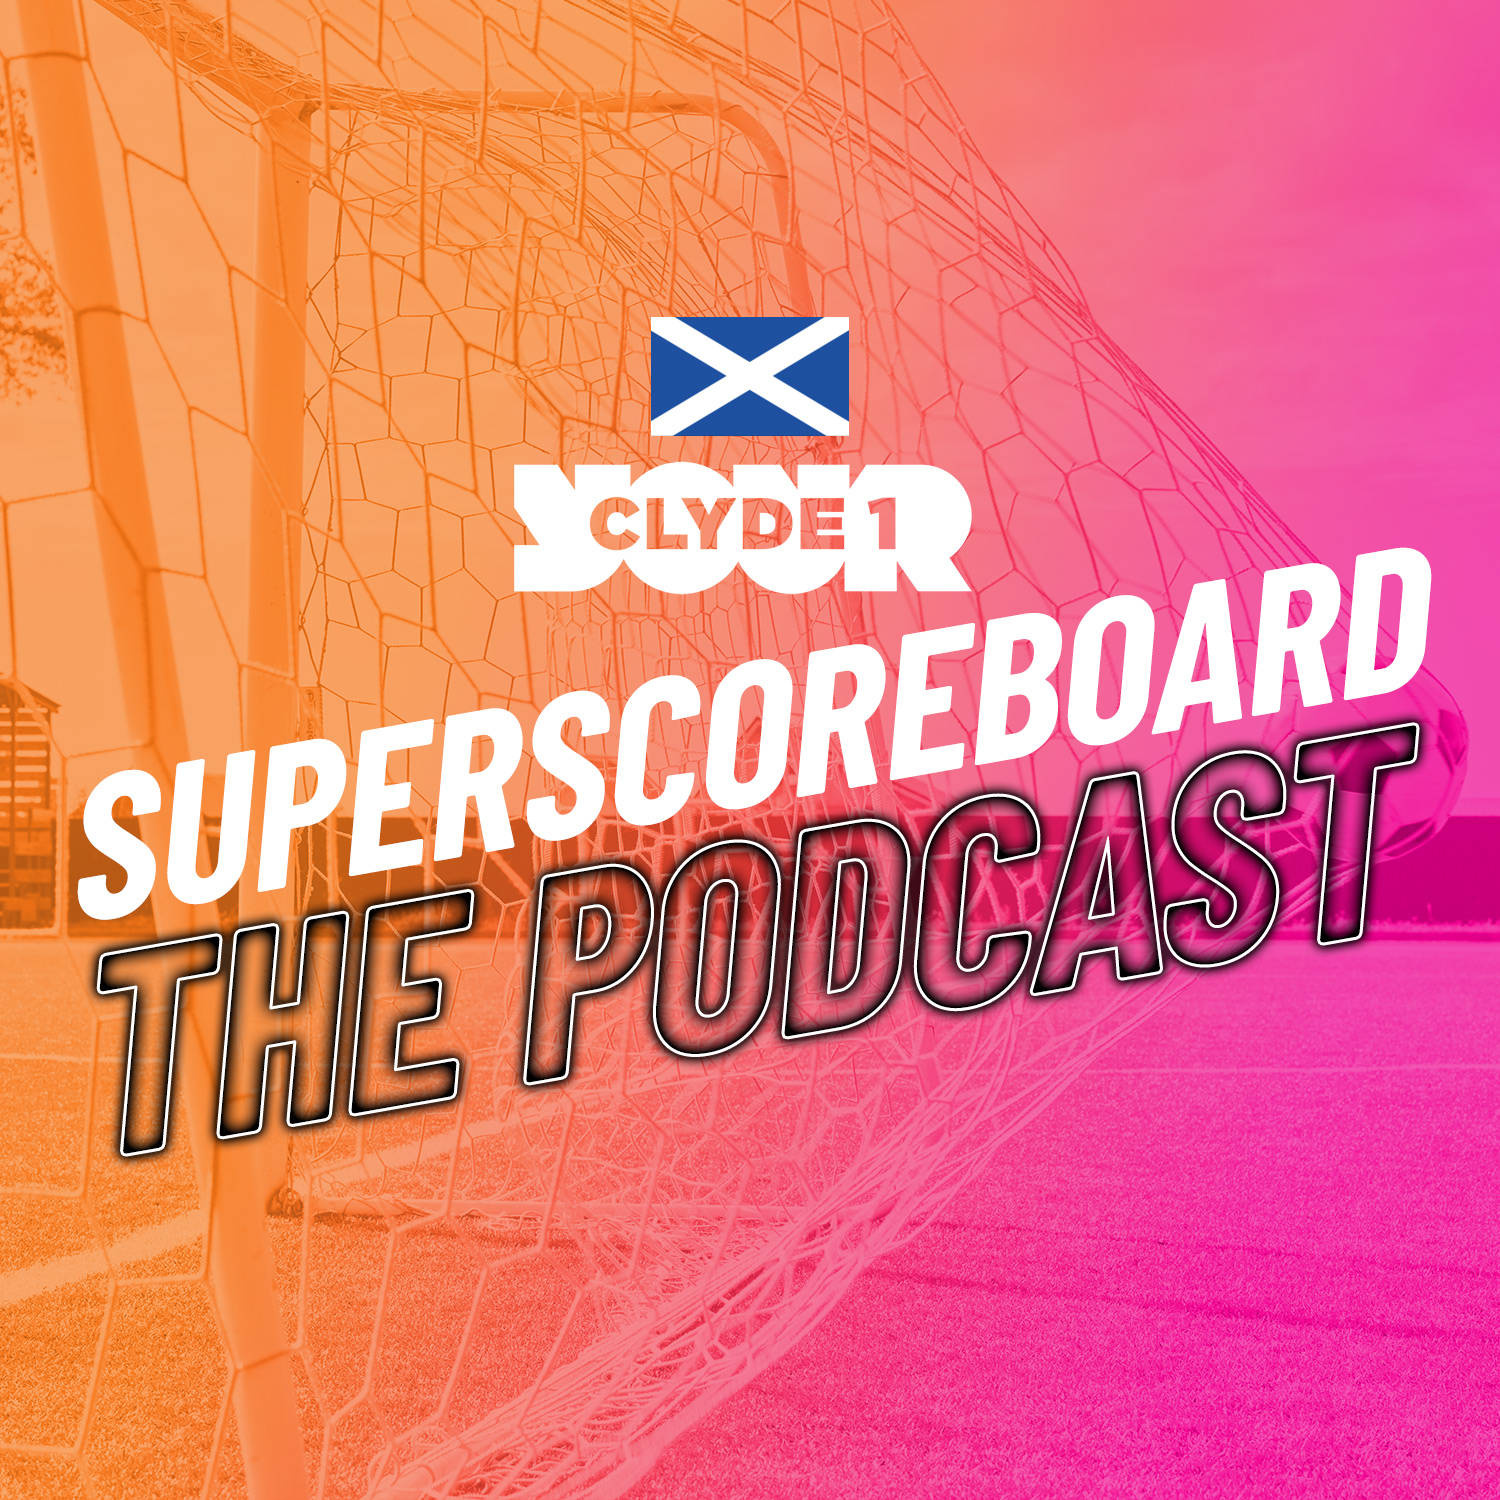 Sunday 7th April Clyde 1 Superscoreboard Part 2